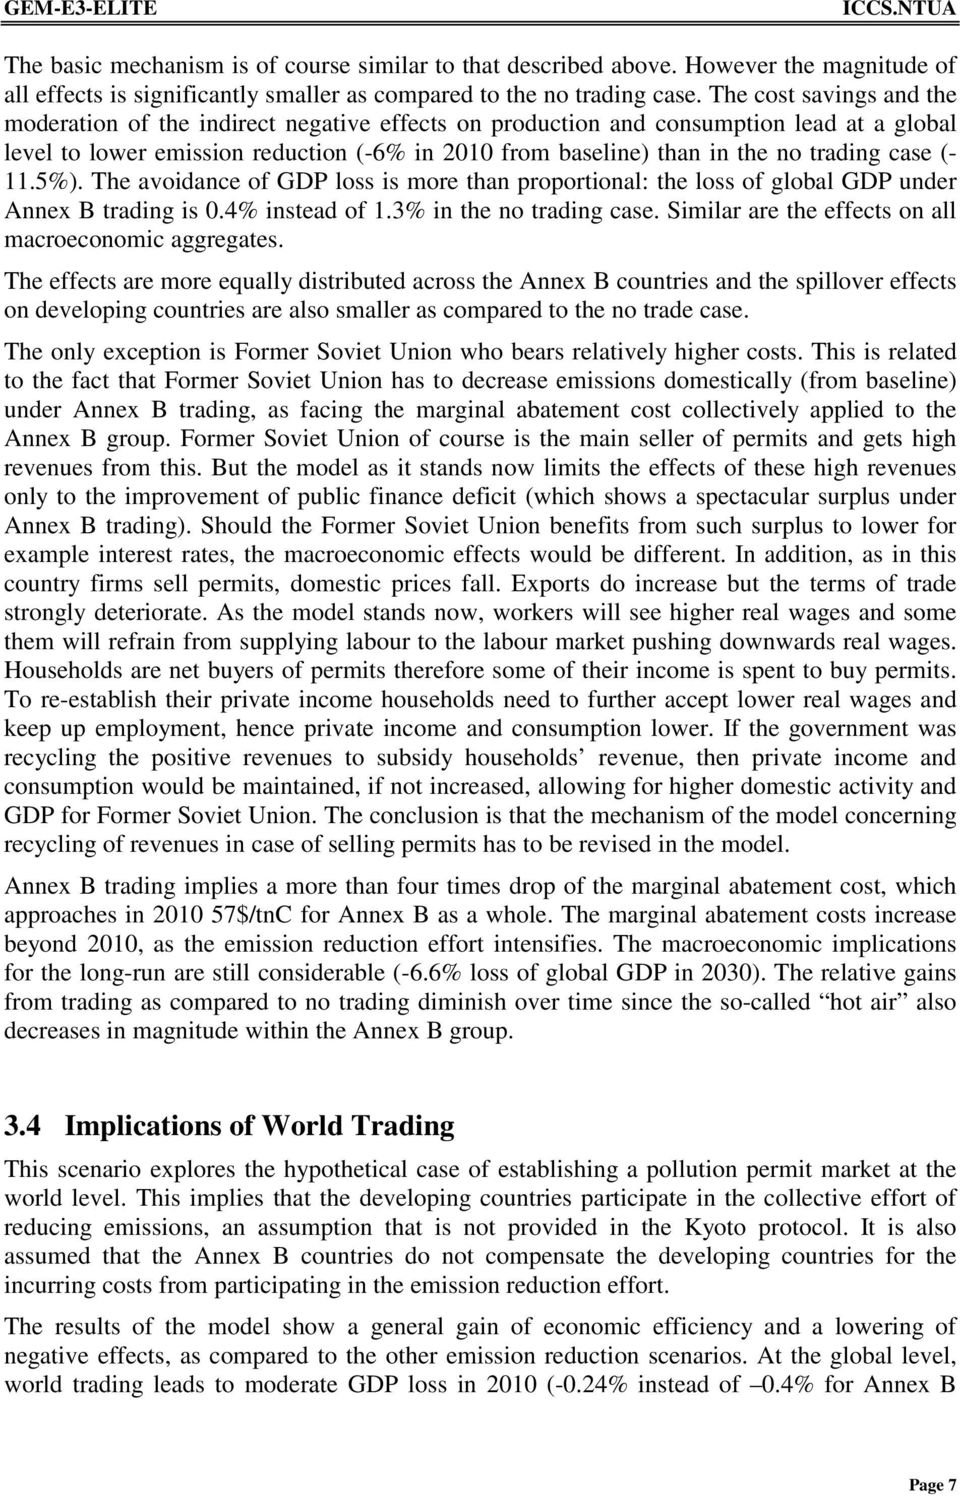 trading case (- 11.5%). The avoidance of GDP loss is more than proportional: the loss of global GDP under Annex B trading is 0.4% instead of 1.3% in the no trading case.